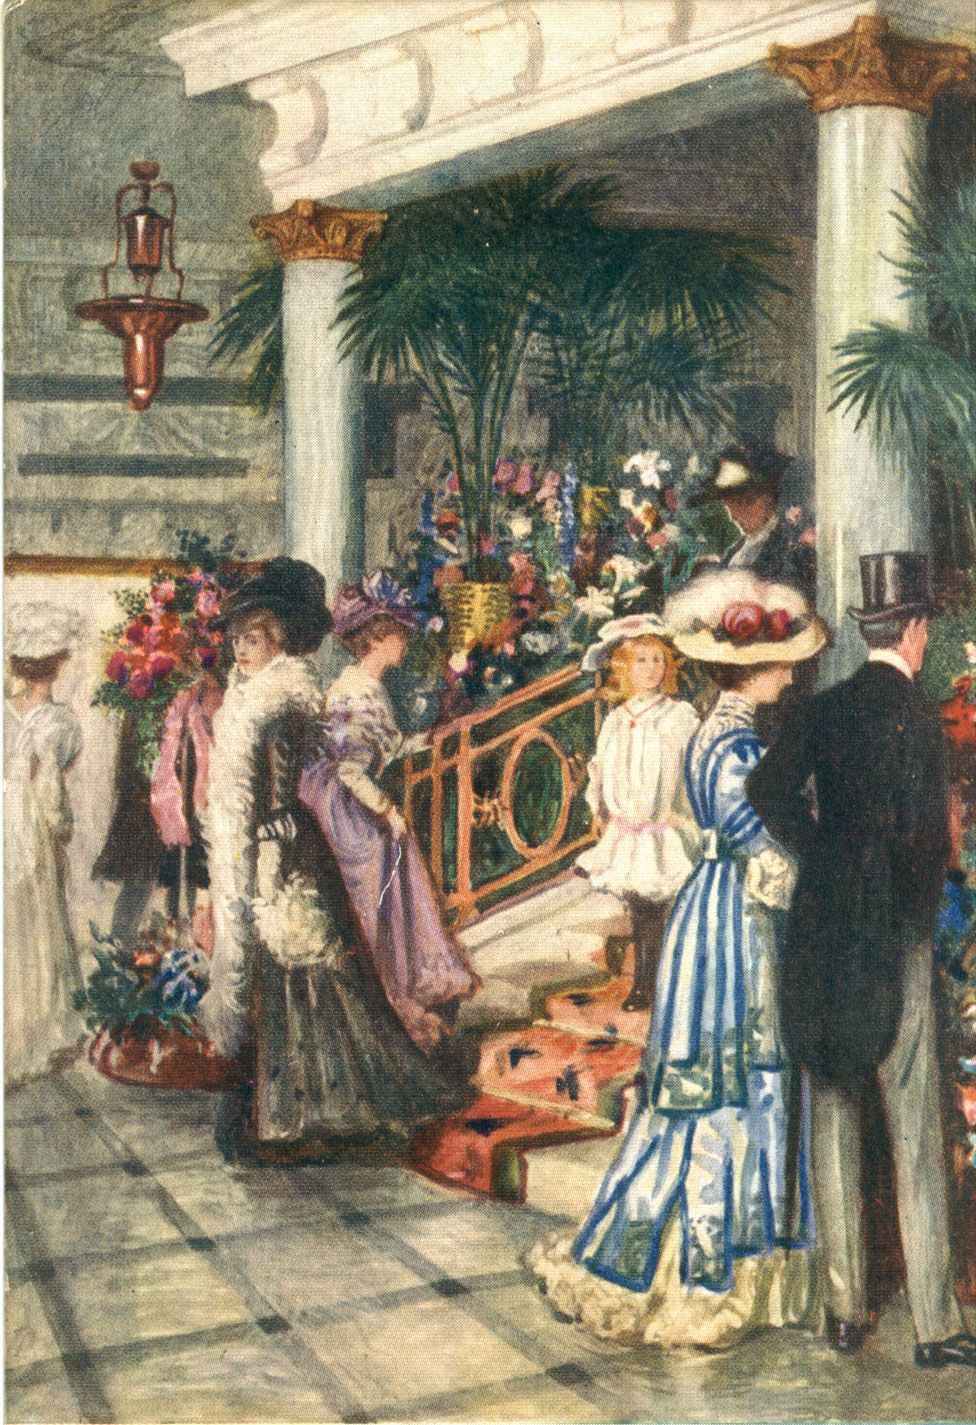 A colourful postcard showing shoppers in a Debenhams store